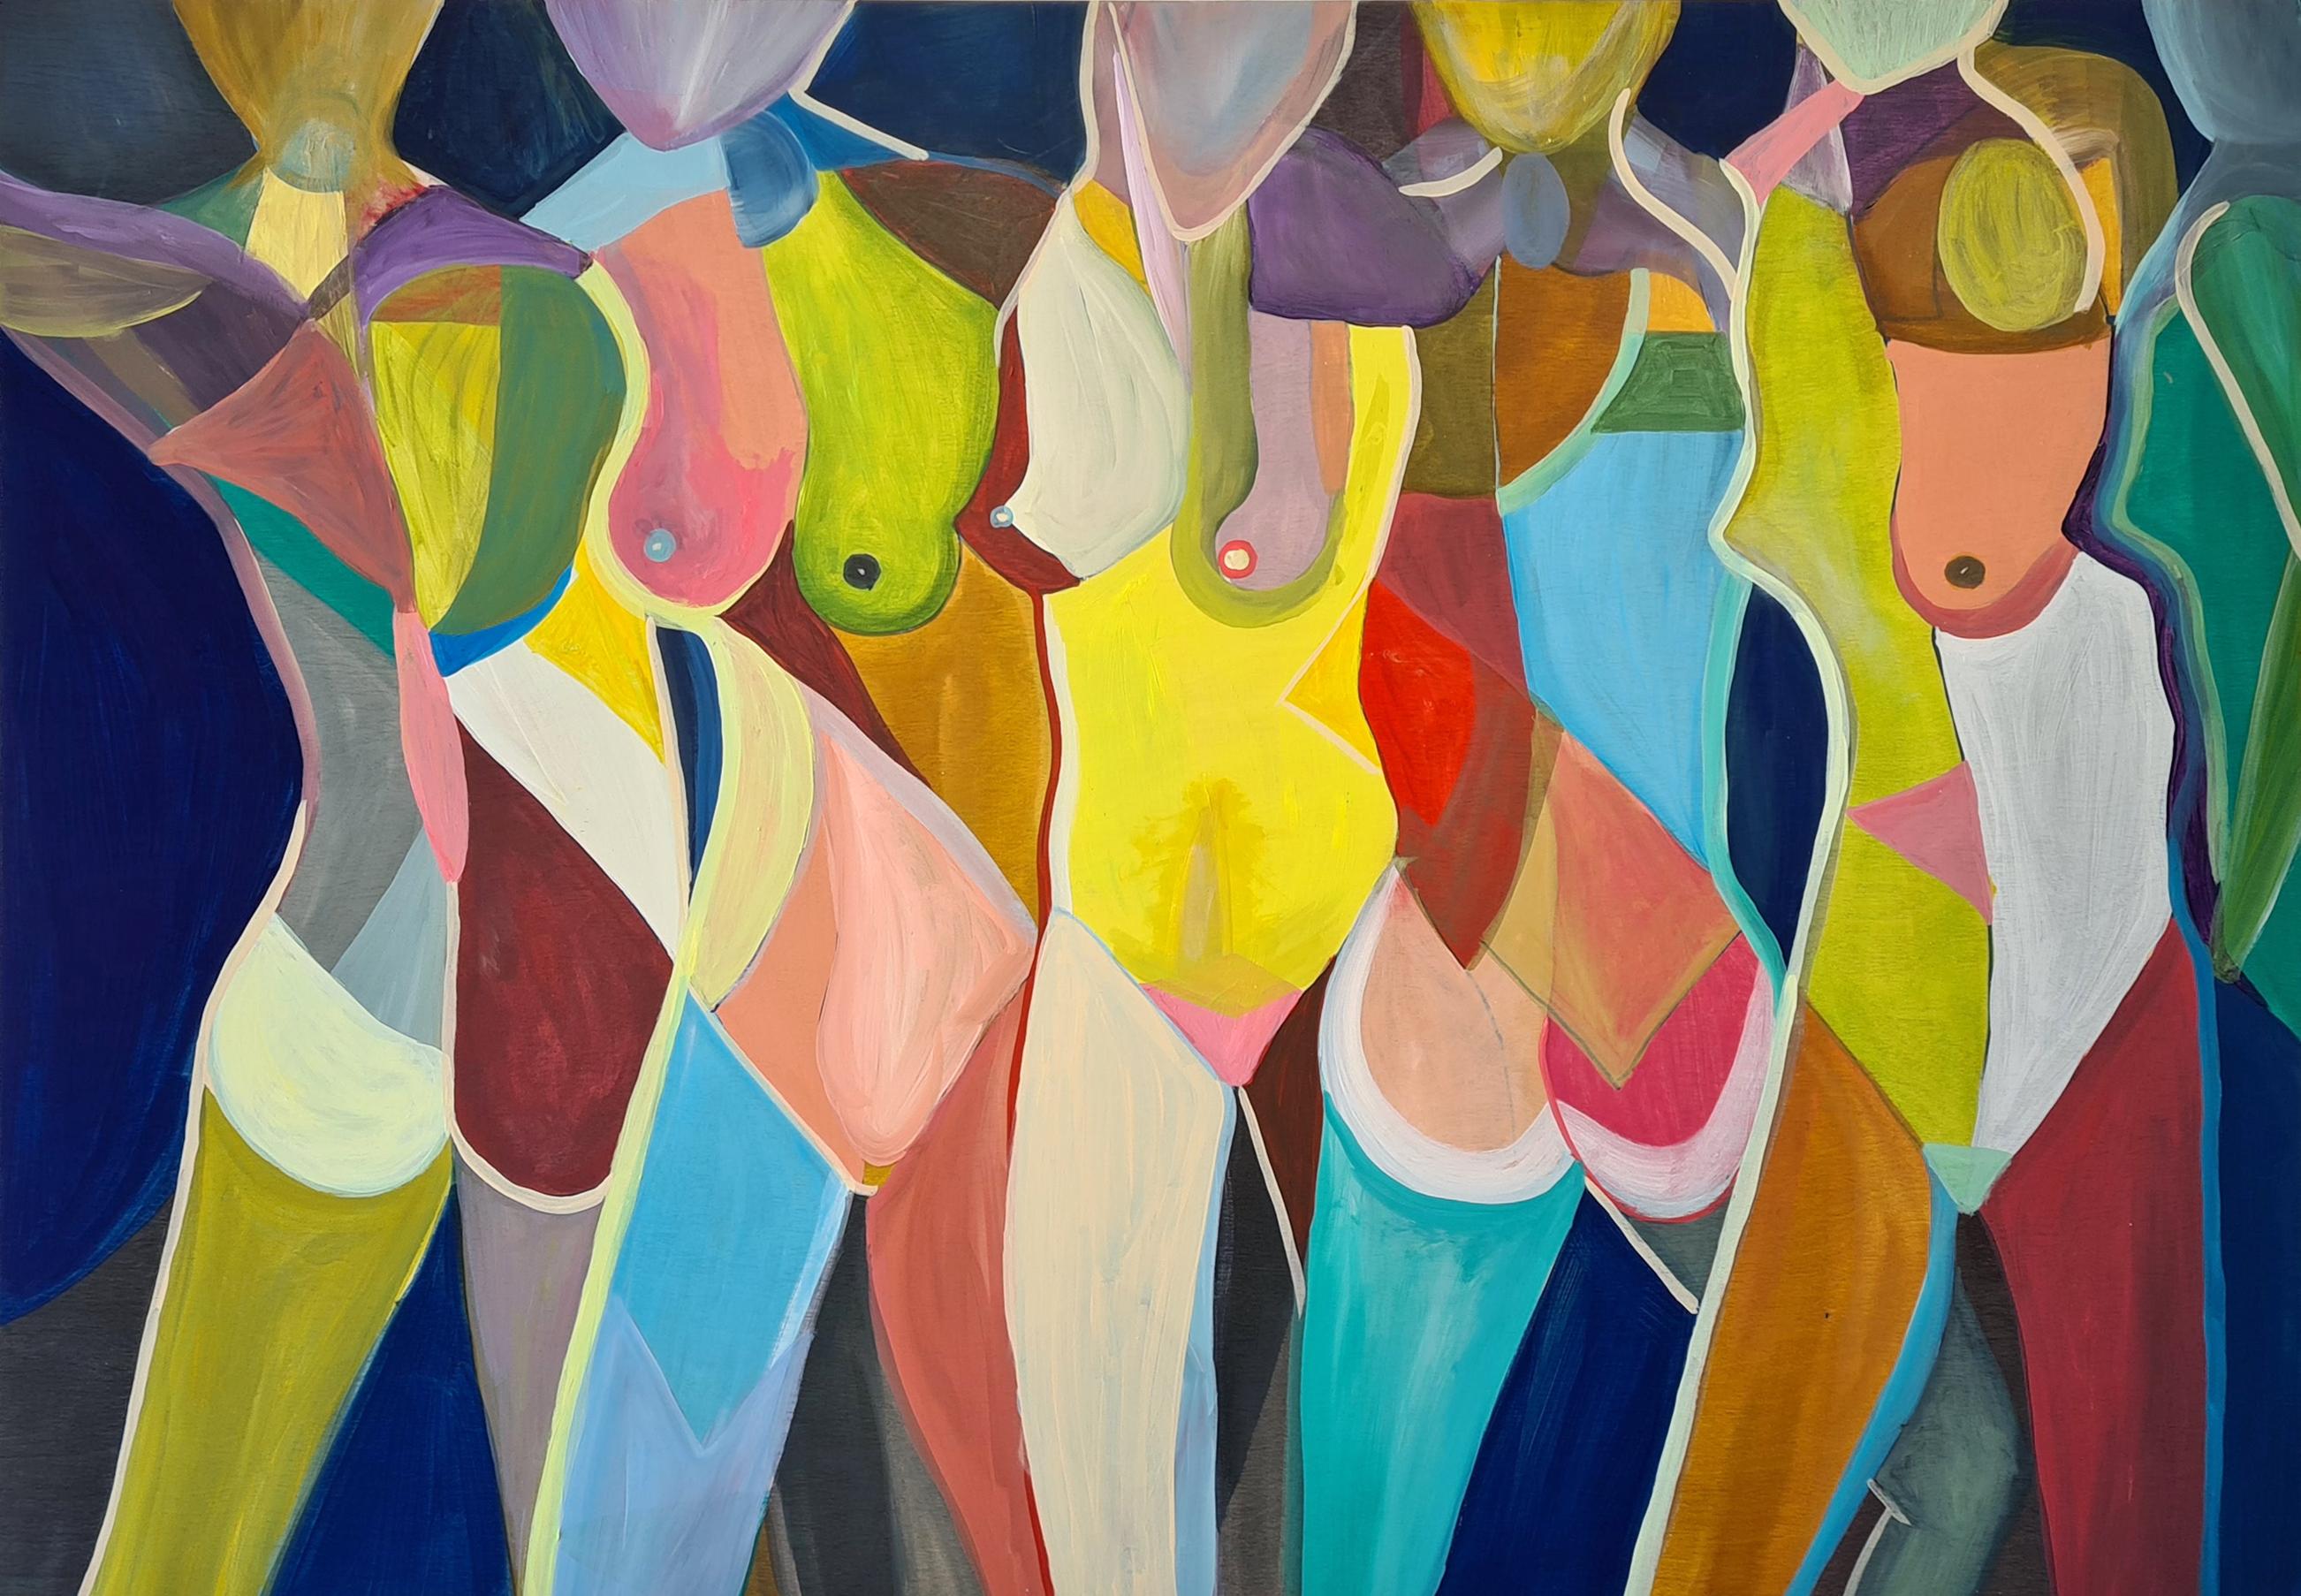 Dancing by K. Hormel - Nude Contemporary abstract colorful painting - Painting by Katharina Hormel